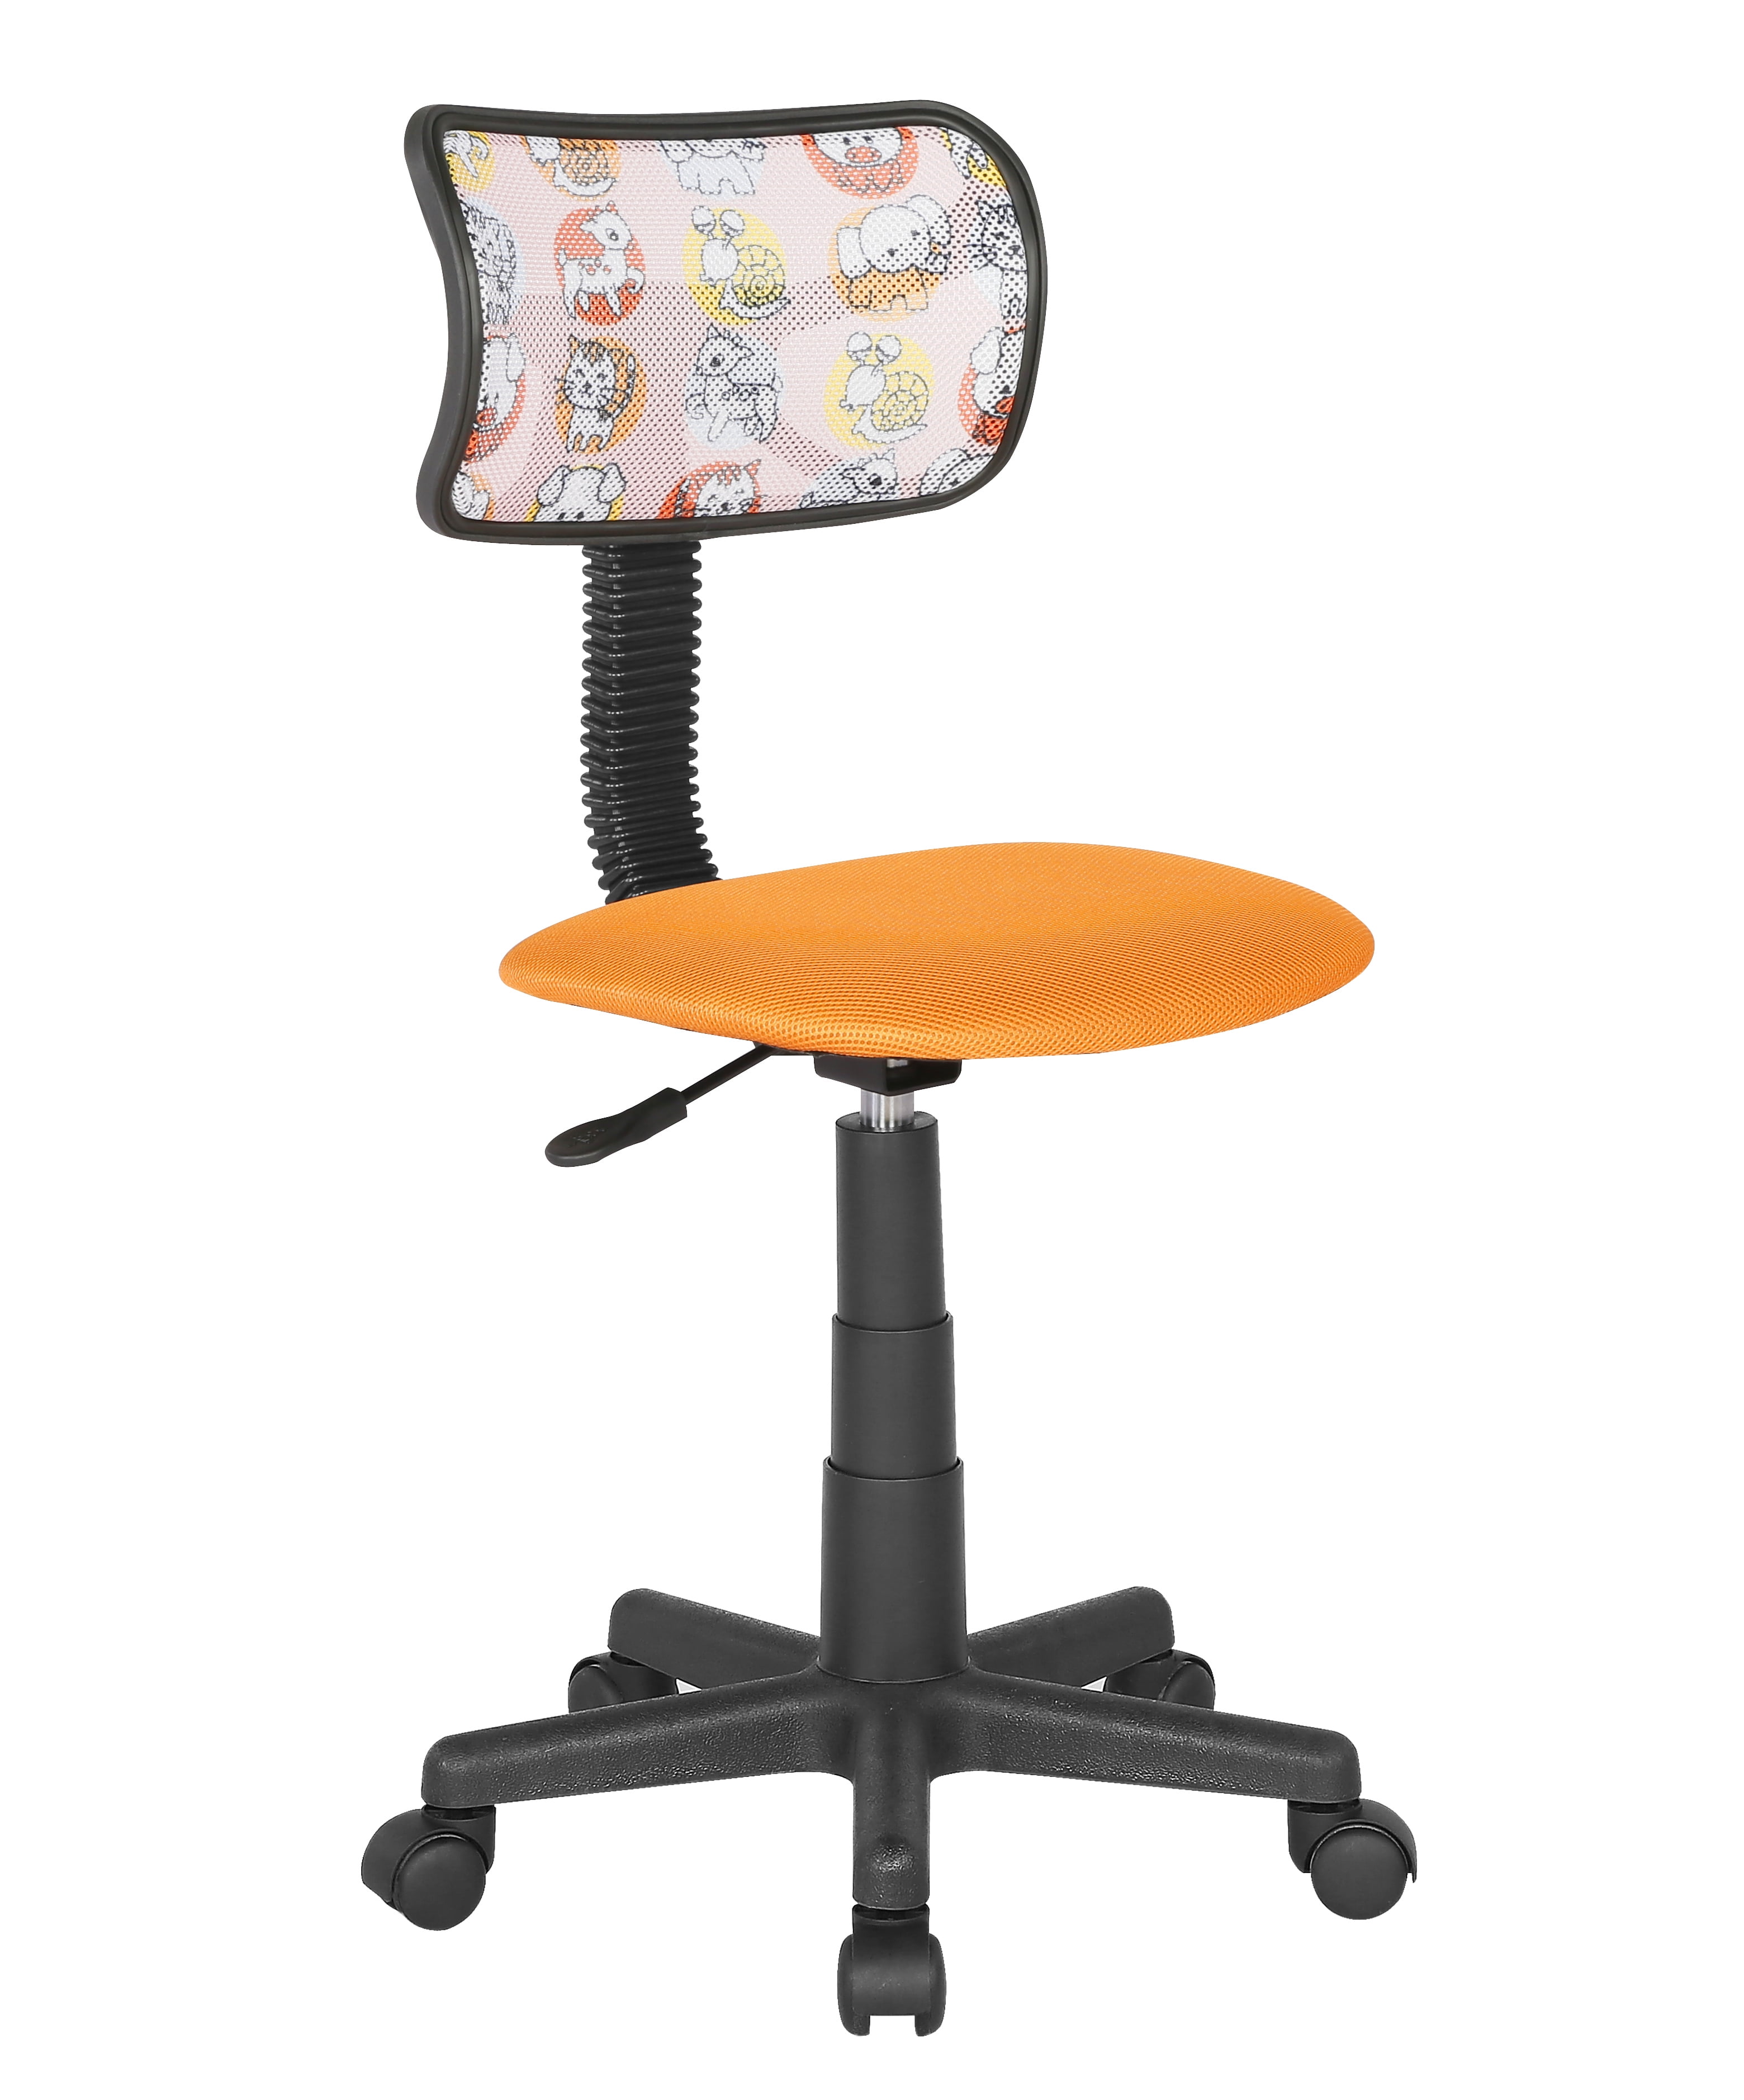 SLIP COVER for Student kids rolling office computer desk armless task chair 